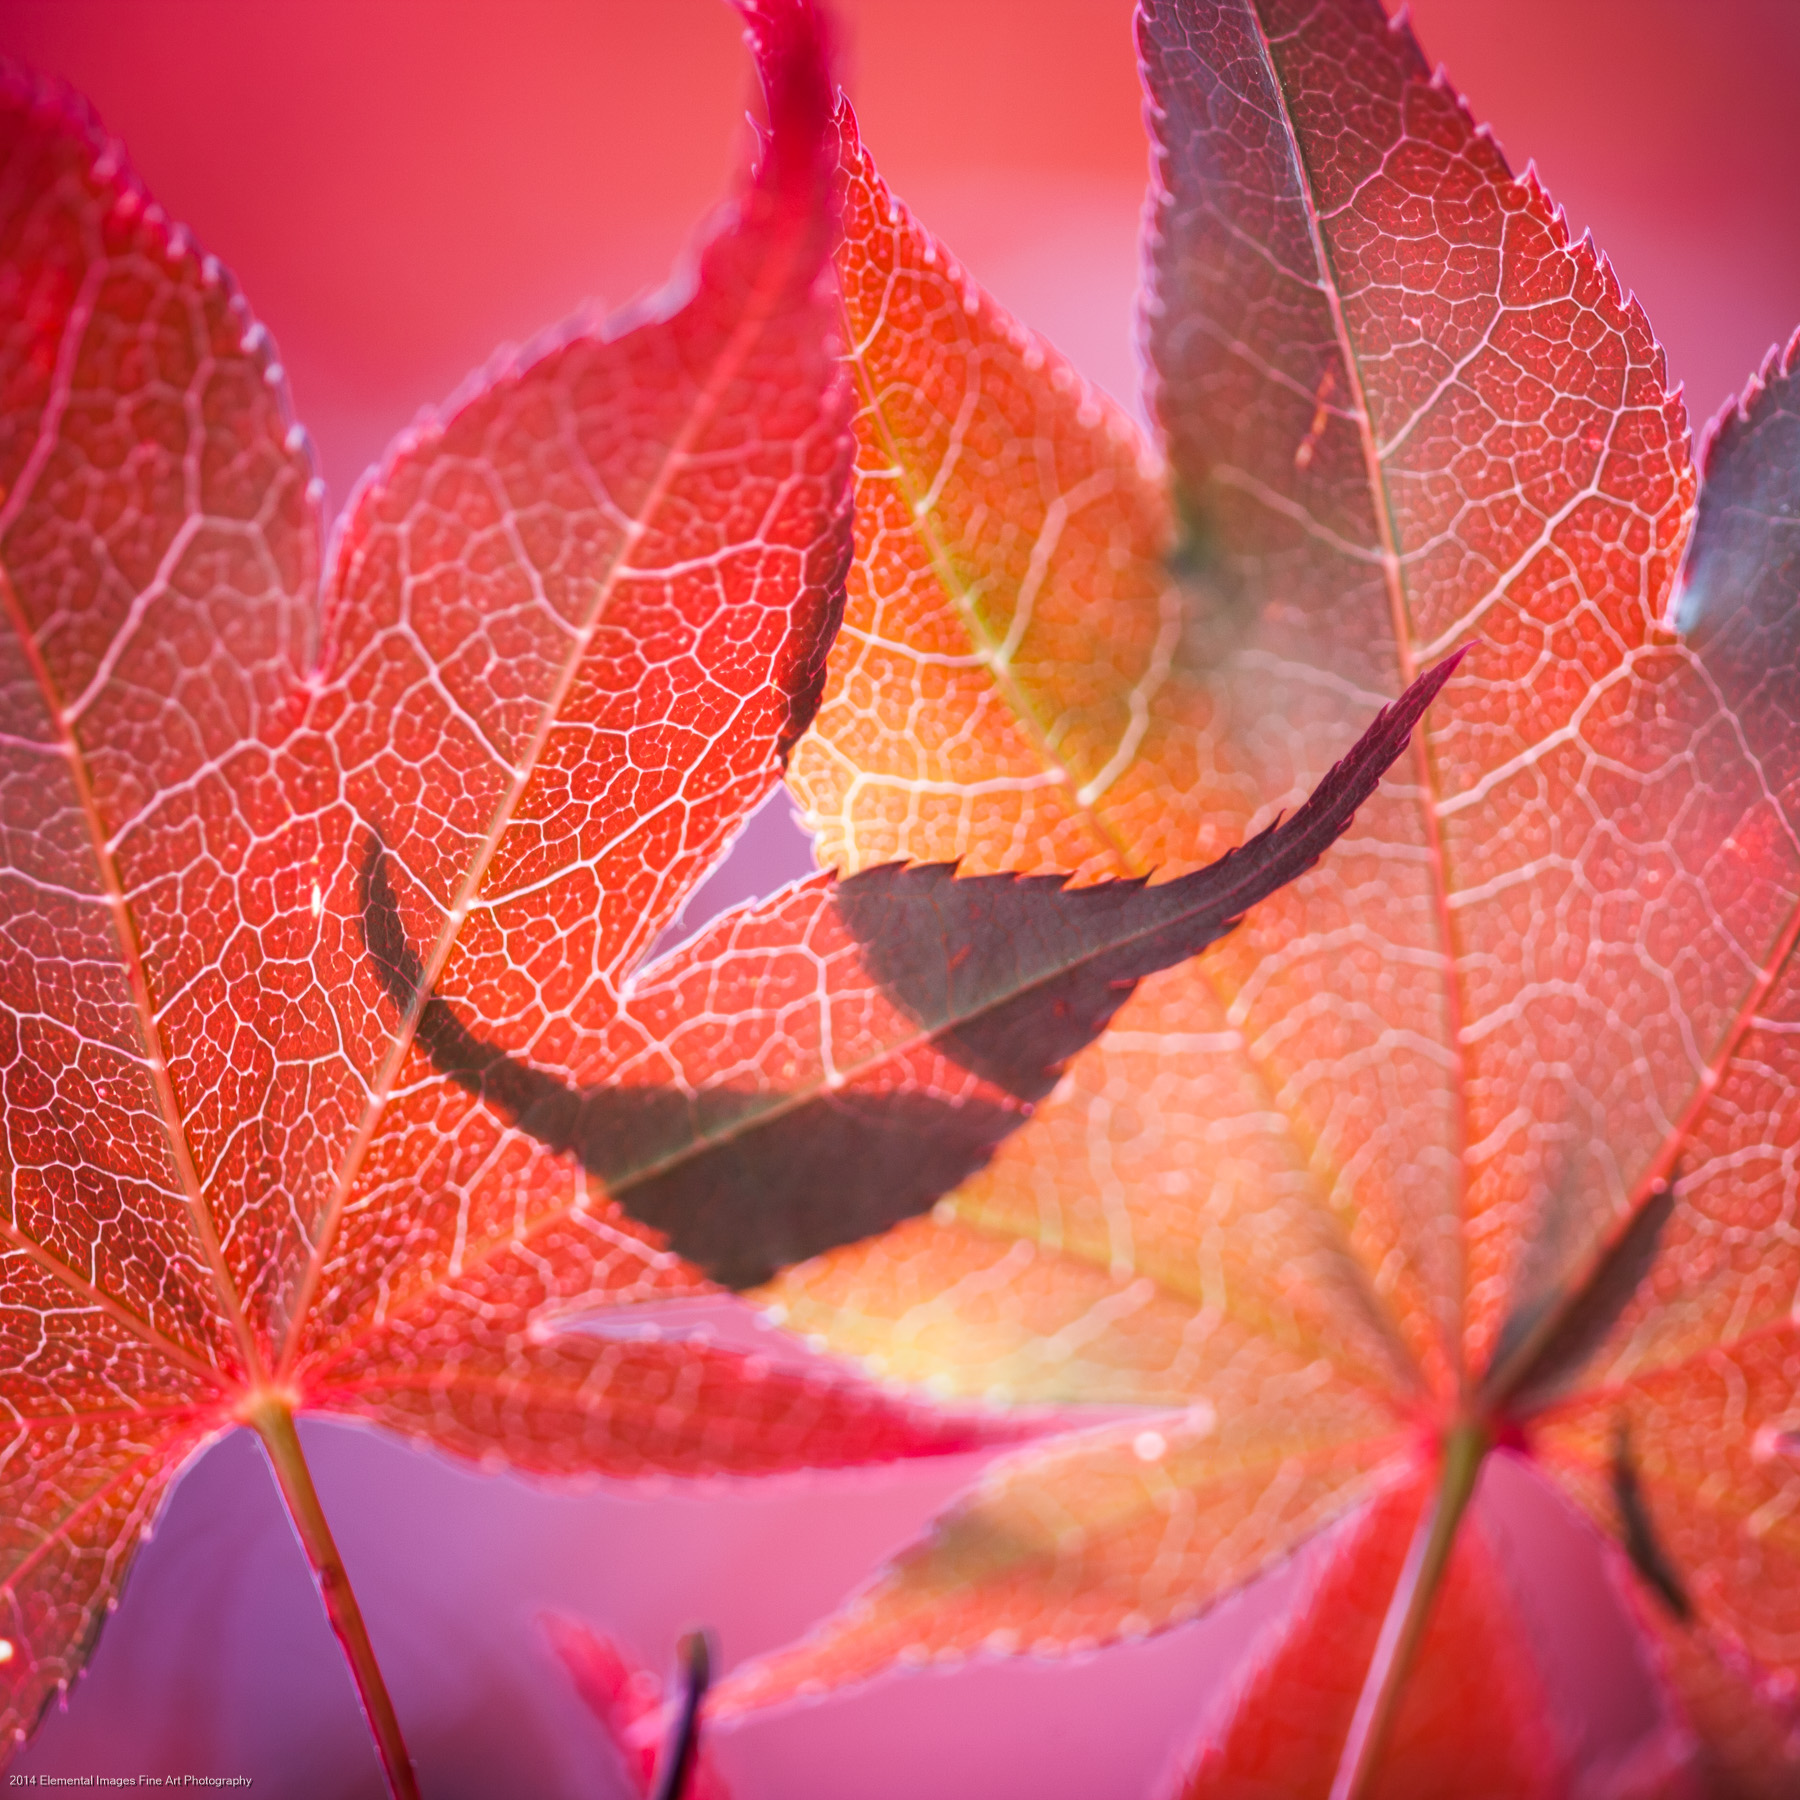 Leaves LXXXVIII | Portland | OR | USA - © 2014 Elemental Images Fine Art Photography - All Rights Reserved Worldwide